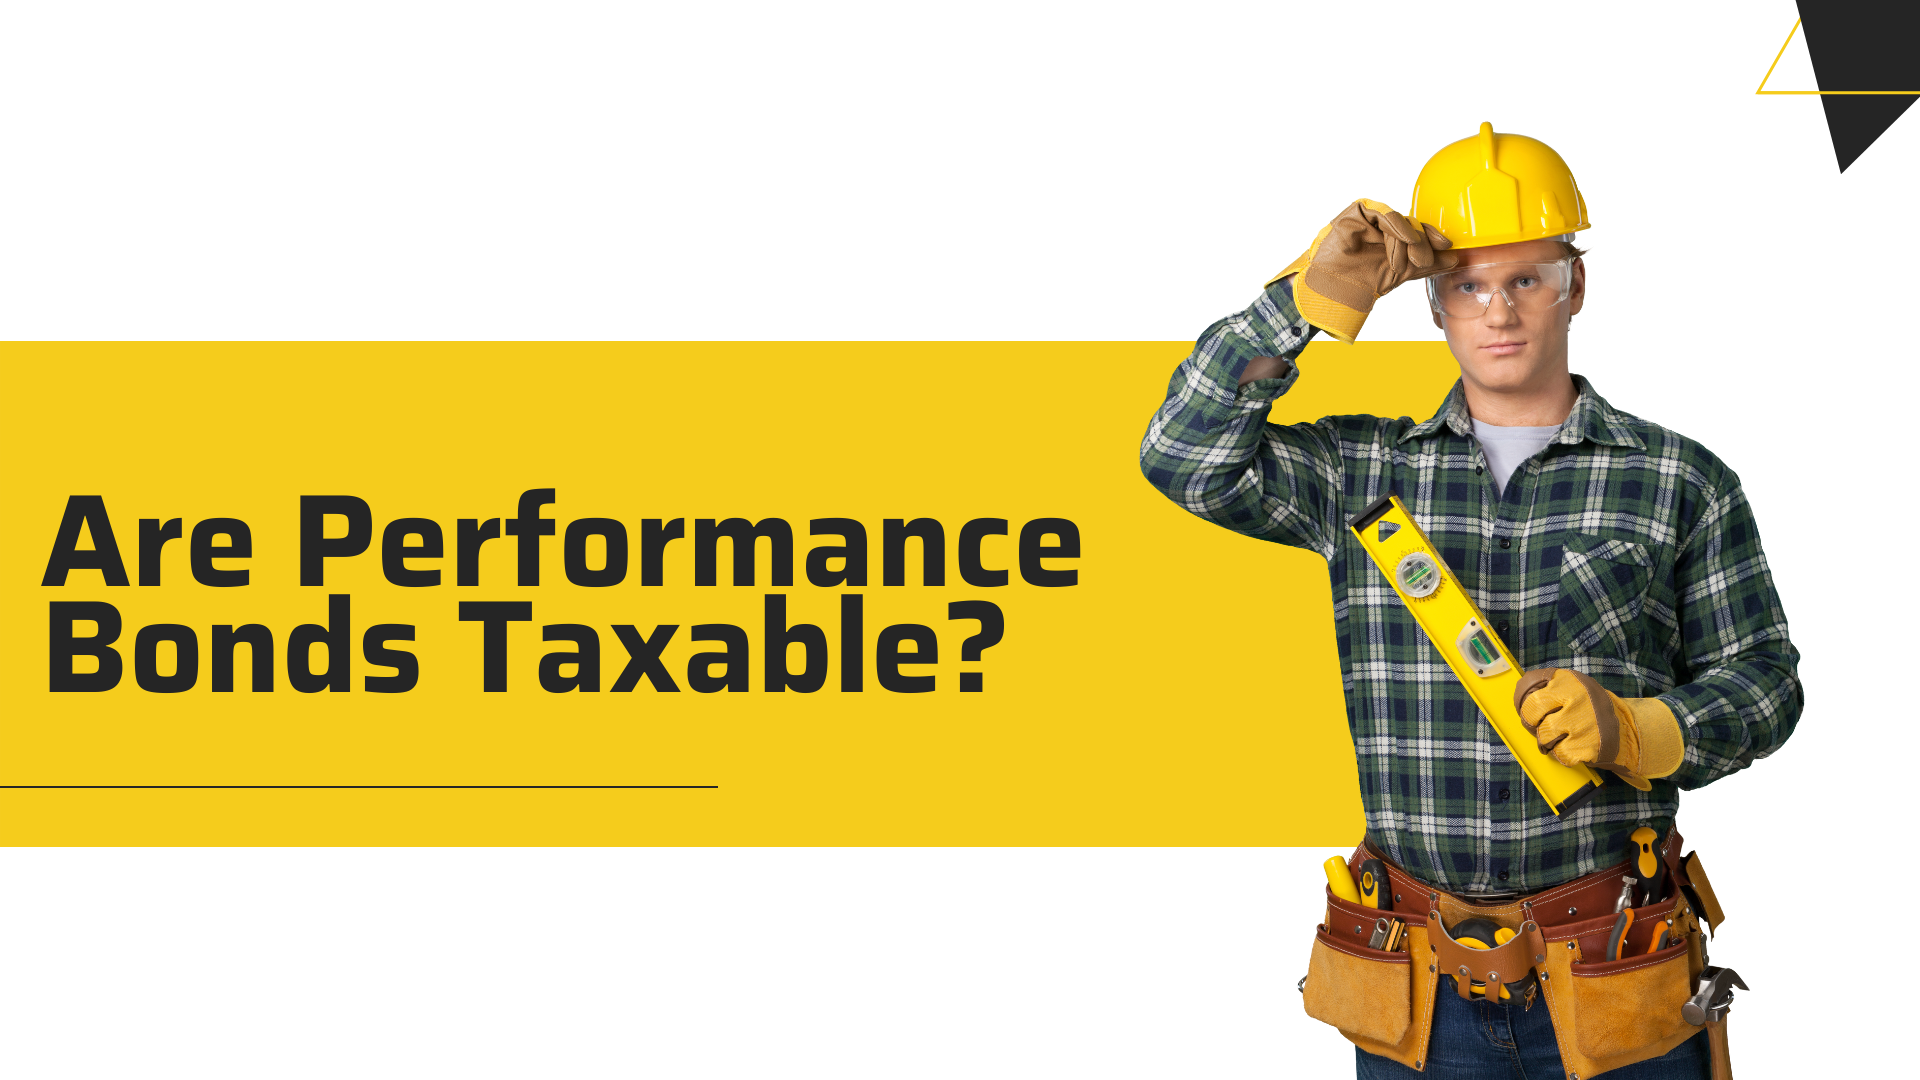 performance bond - Are performance bonds taxable - contractor in full gear